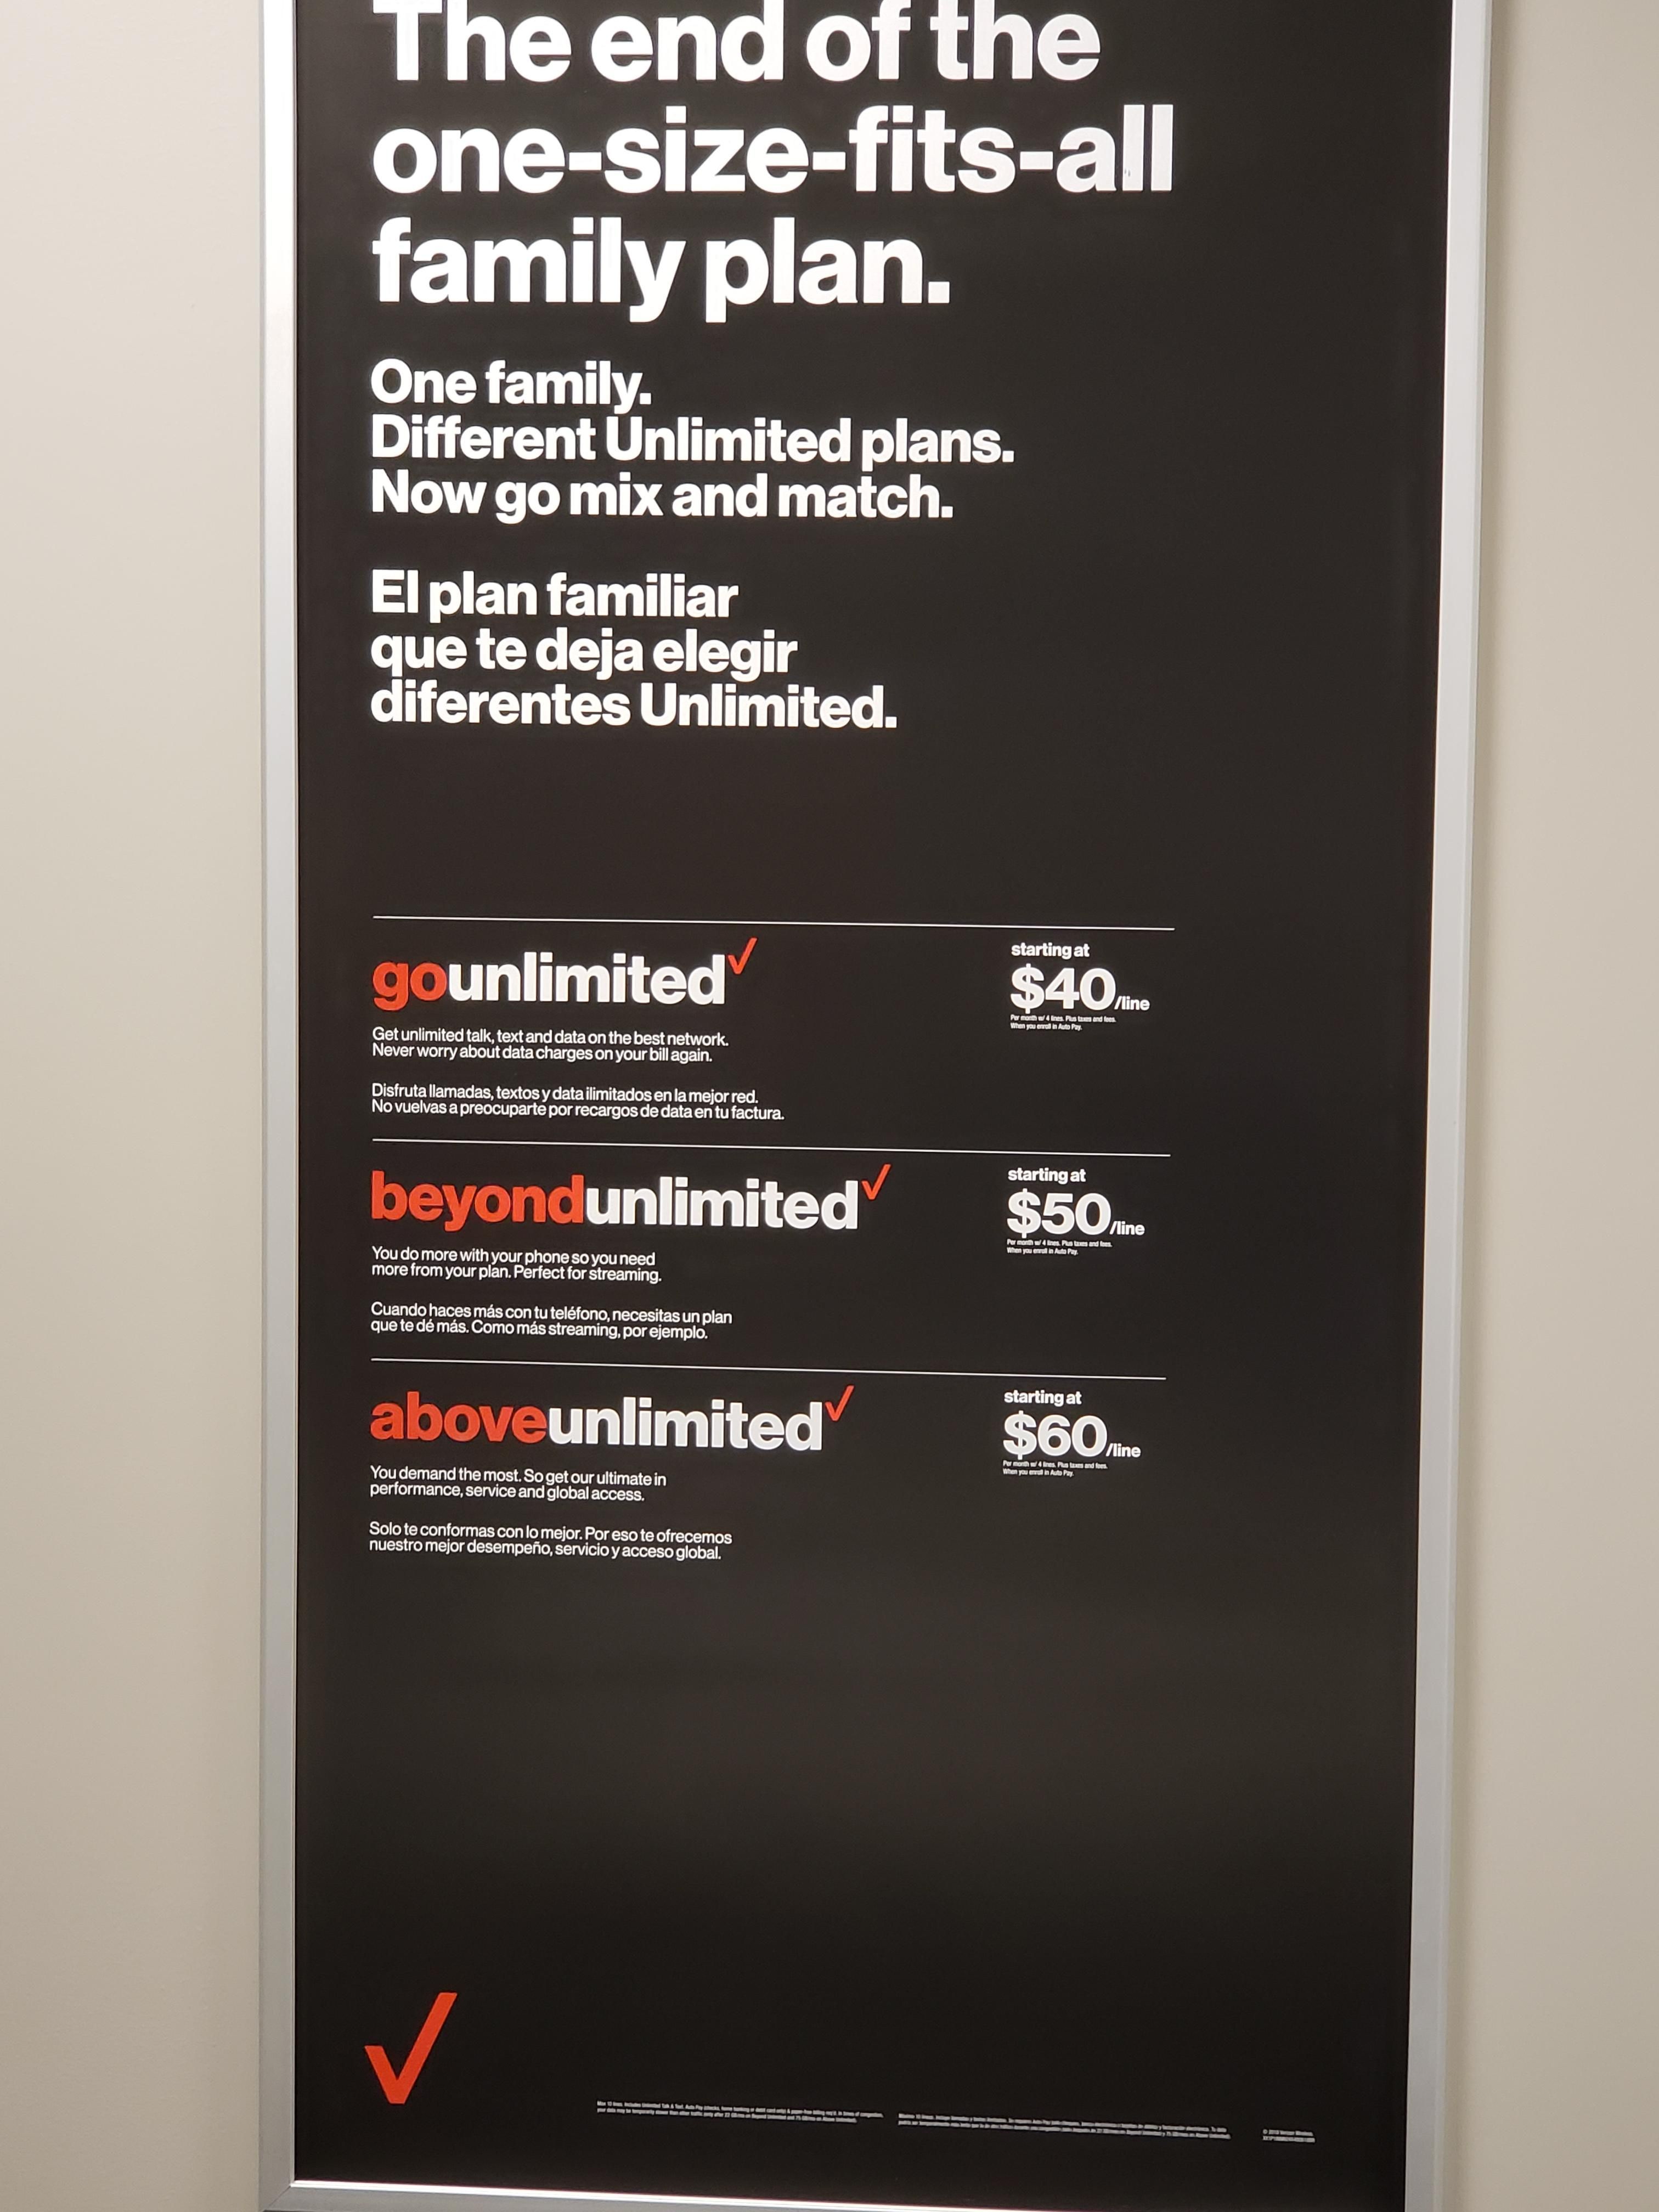 Is it just me or does Verizon have no f*ing clue what the word unlimited means?